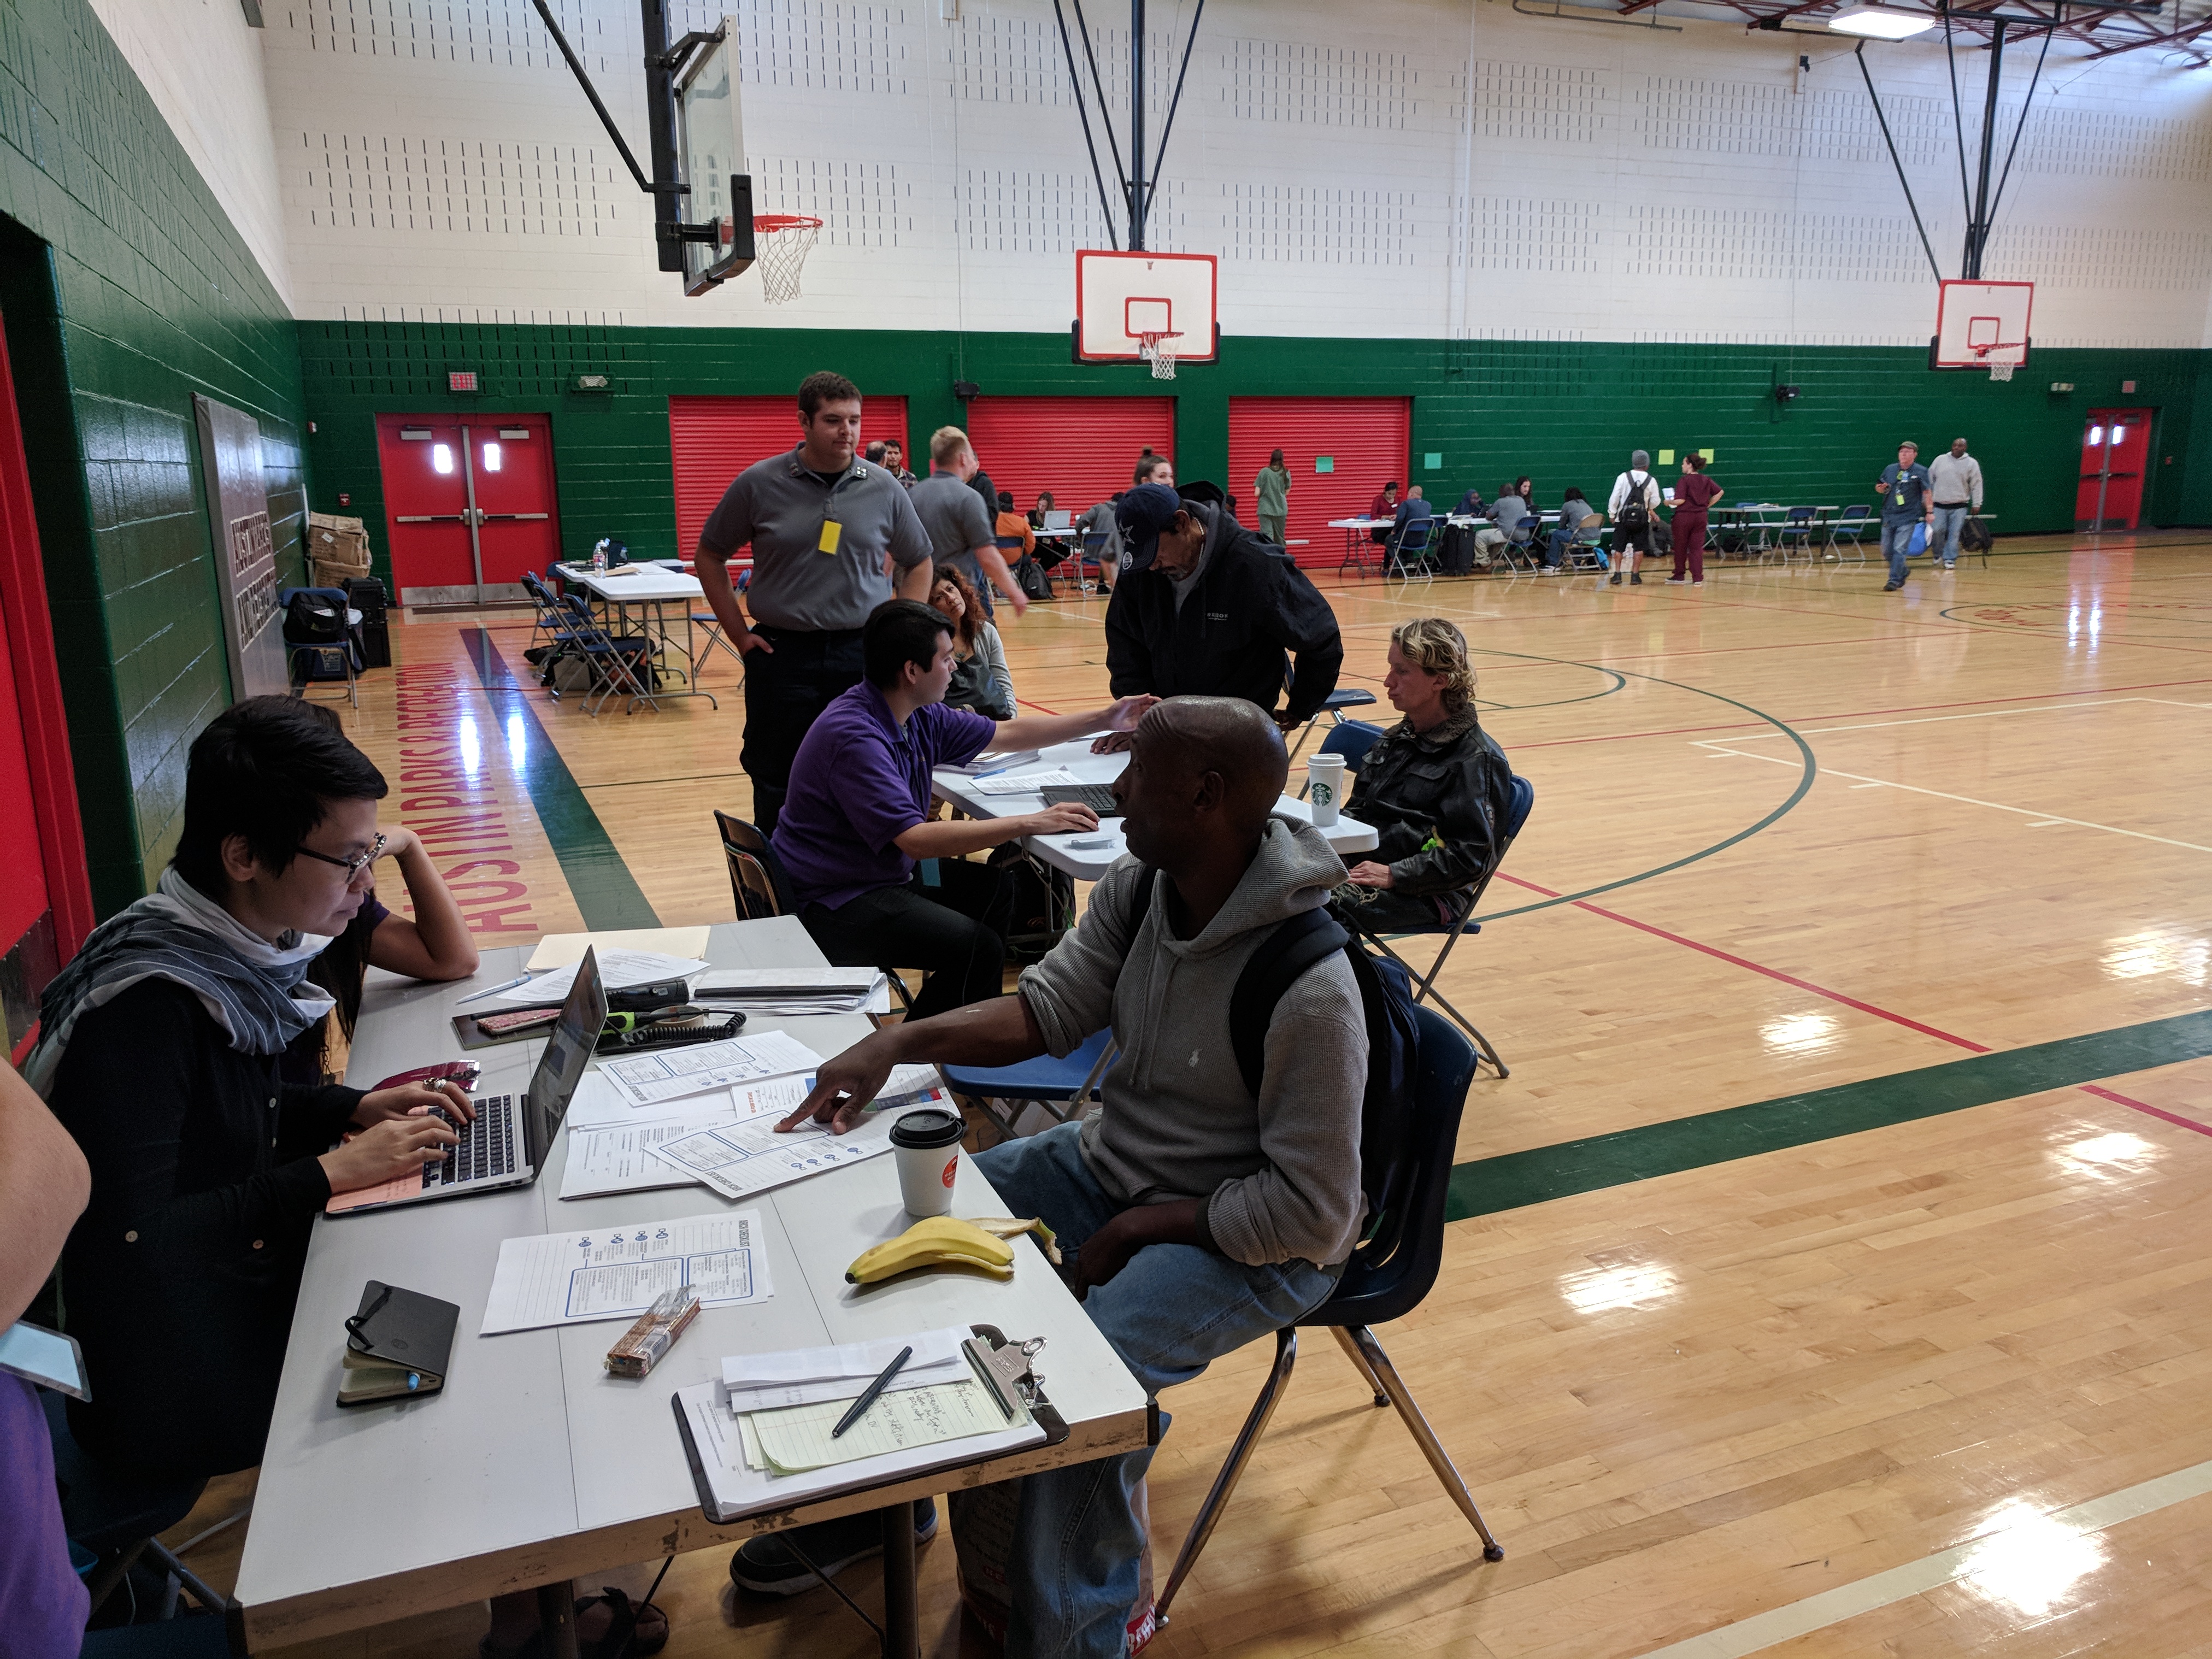 Tables are set up in the outer edges of a school gym. There are people sitting at each of these tables, using laptops and referencing papers.